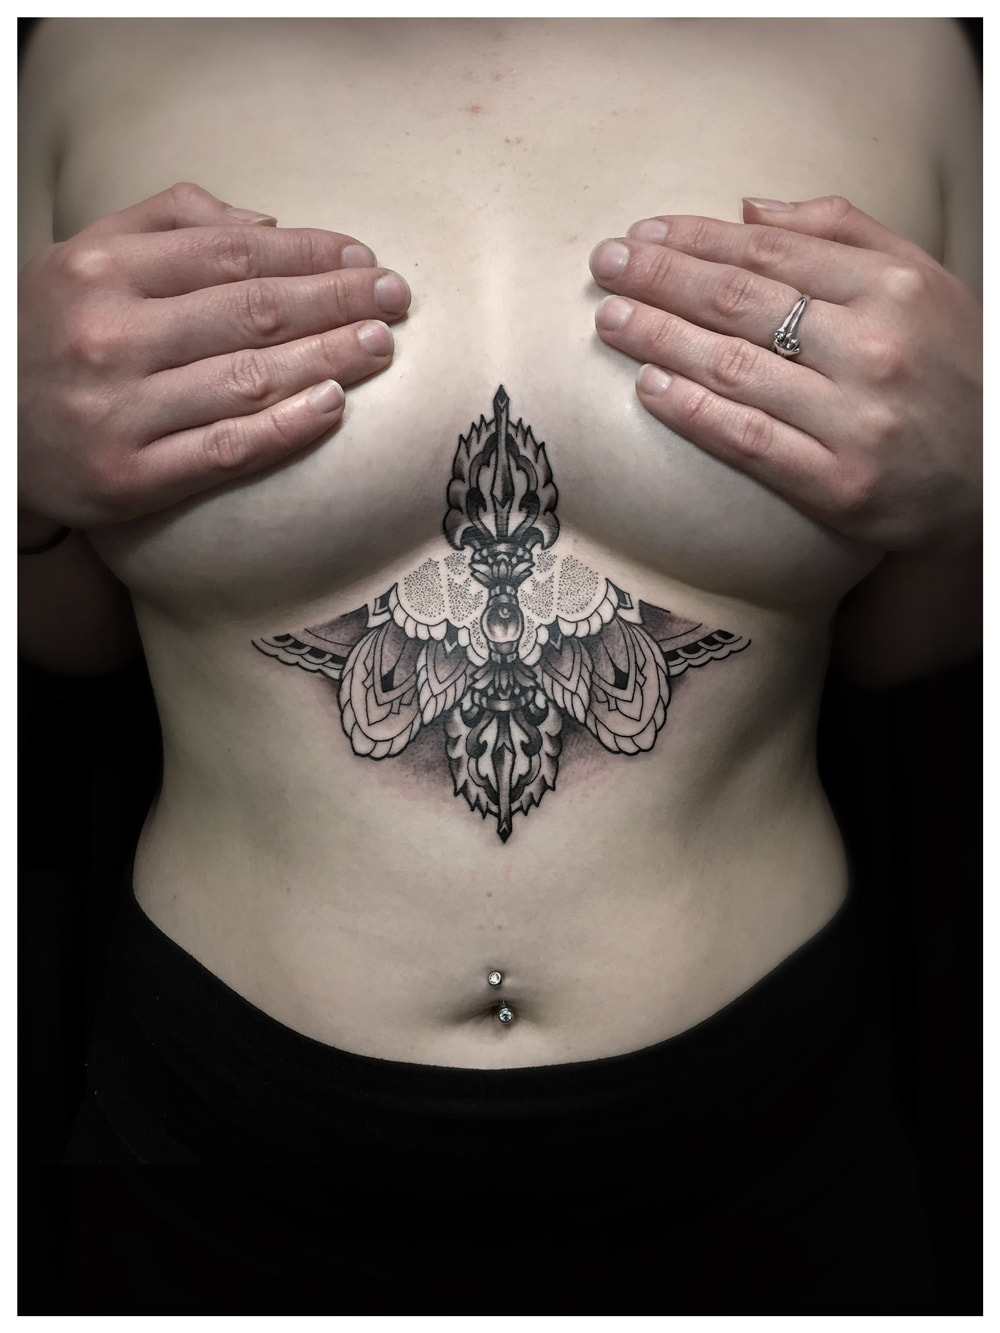 Woman with a sternum tattoo of geometric